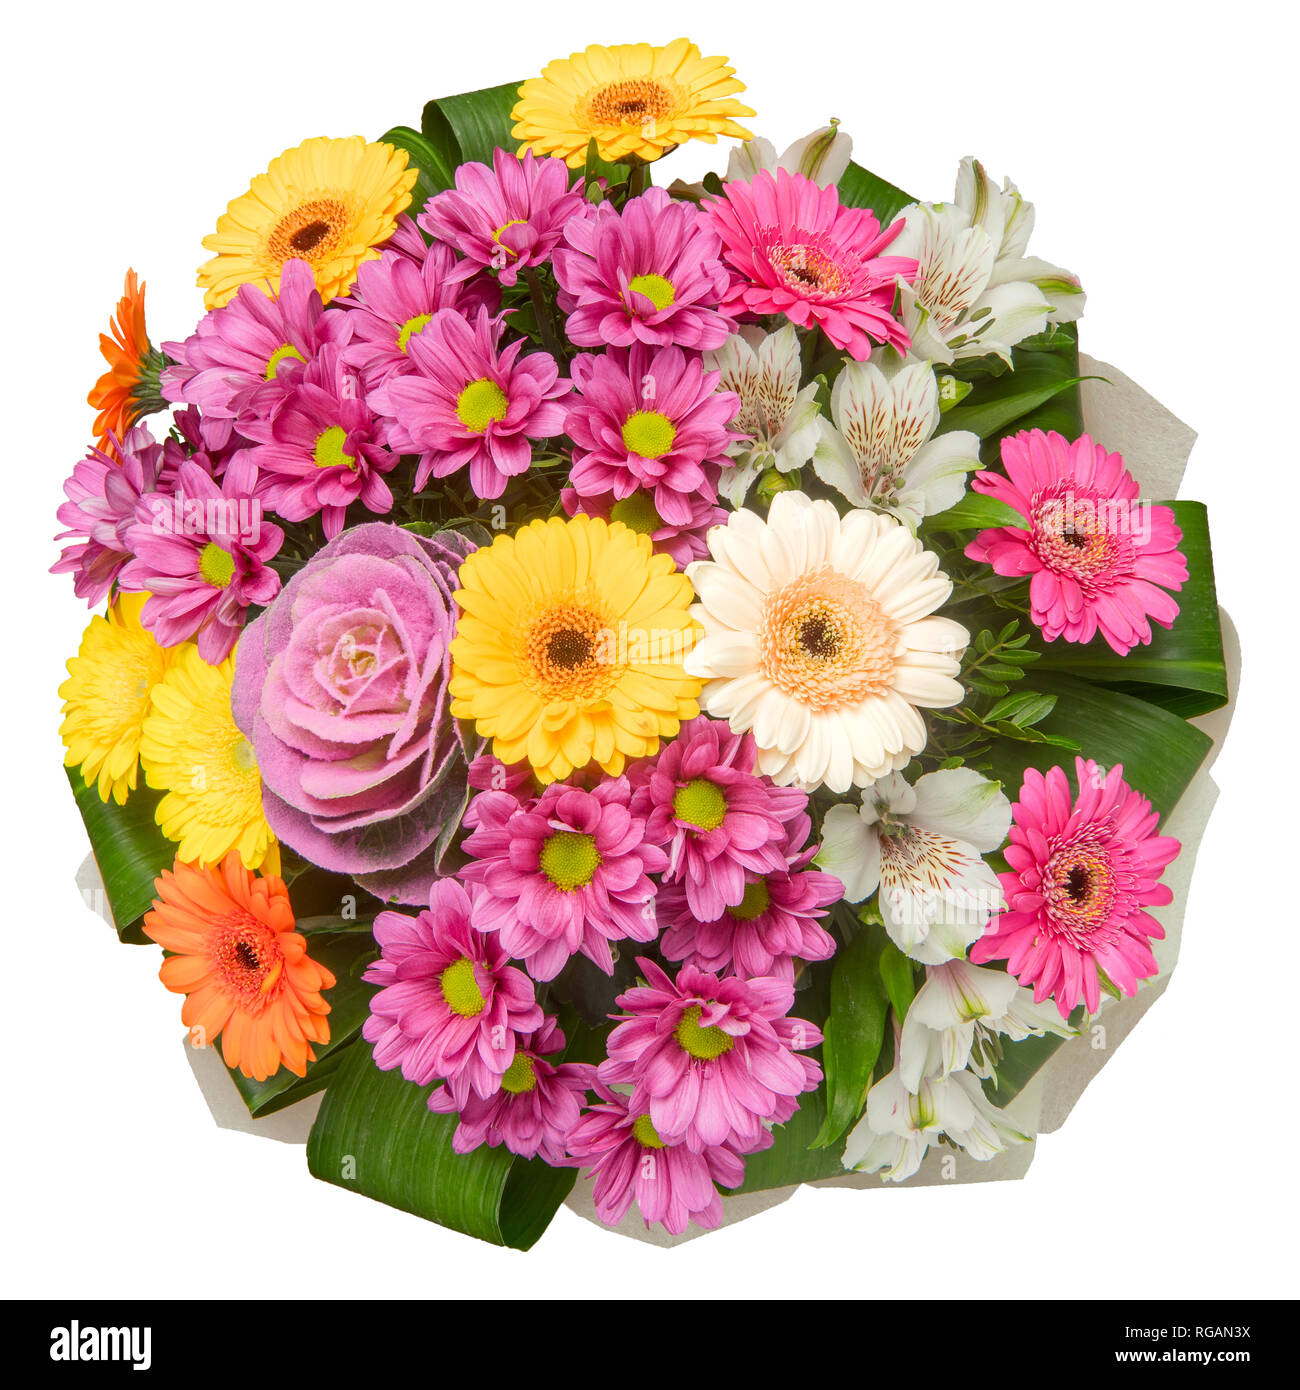 Colorful flower bouquet with chrysanthemums, gerbera daisies and ornamental cabbage isolated on white background. Stock Photo